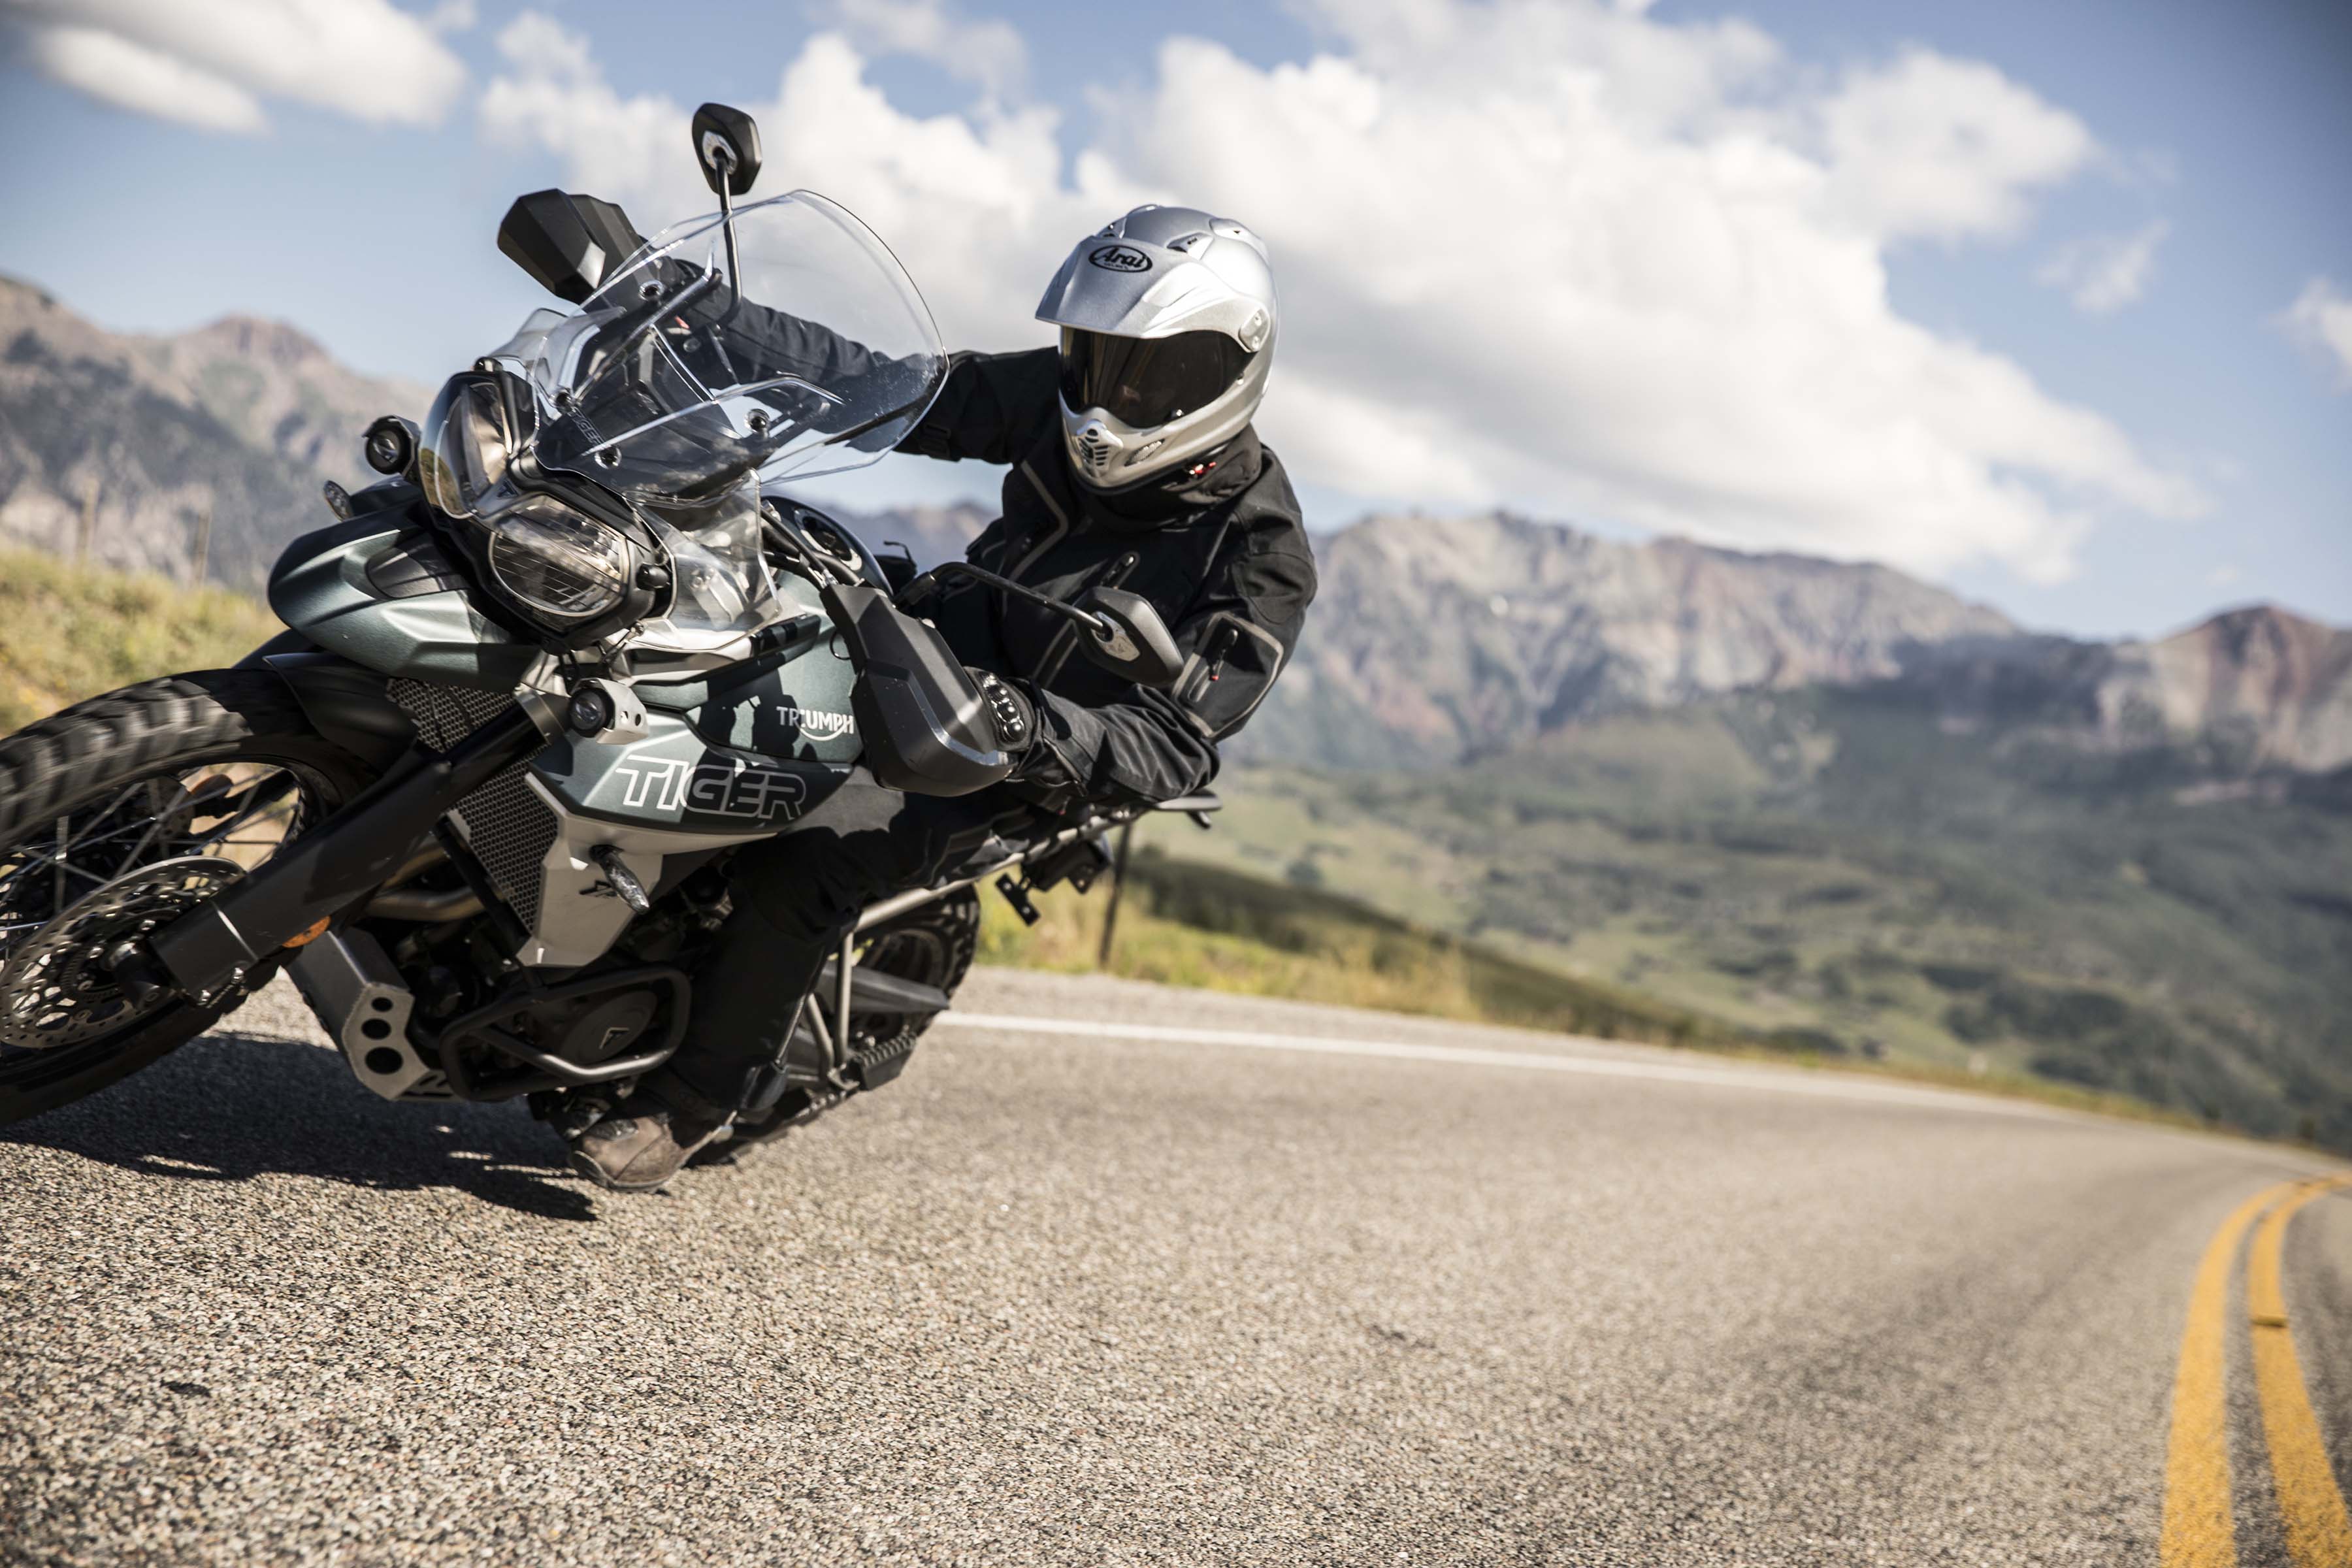 2013 Triumph Tiger 800 XC Review - Top Speed